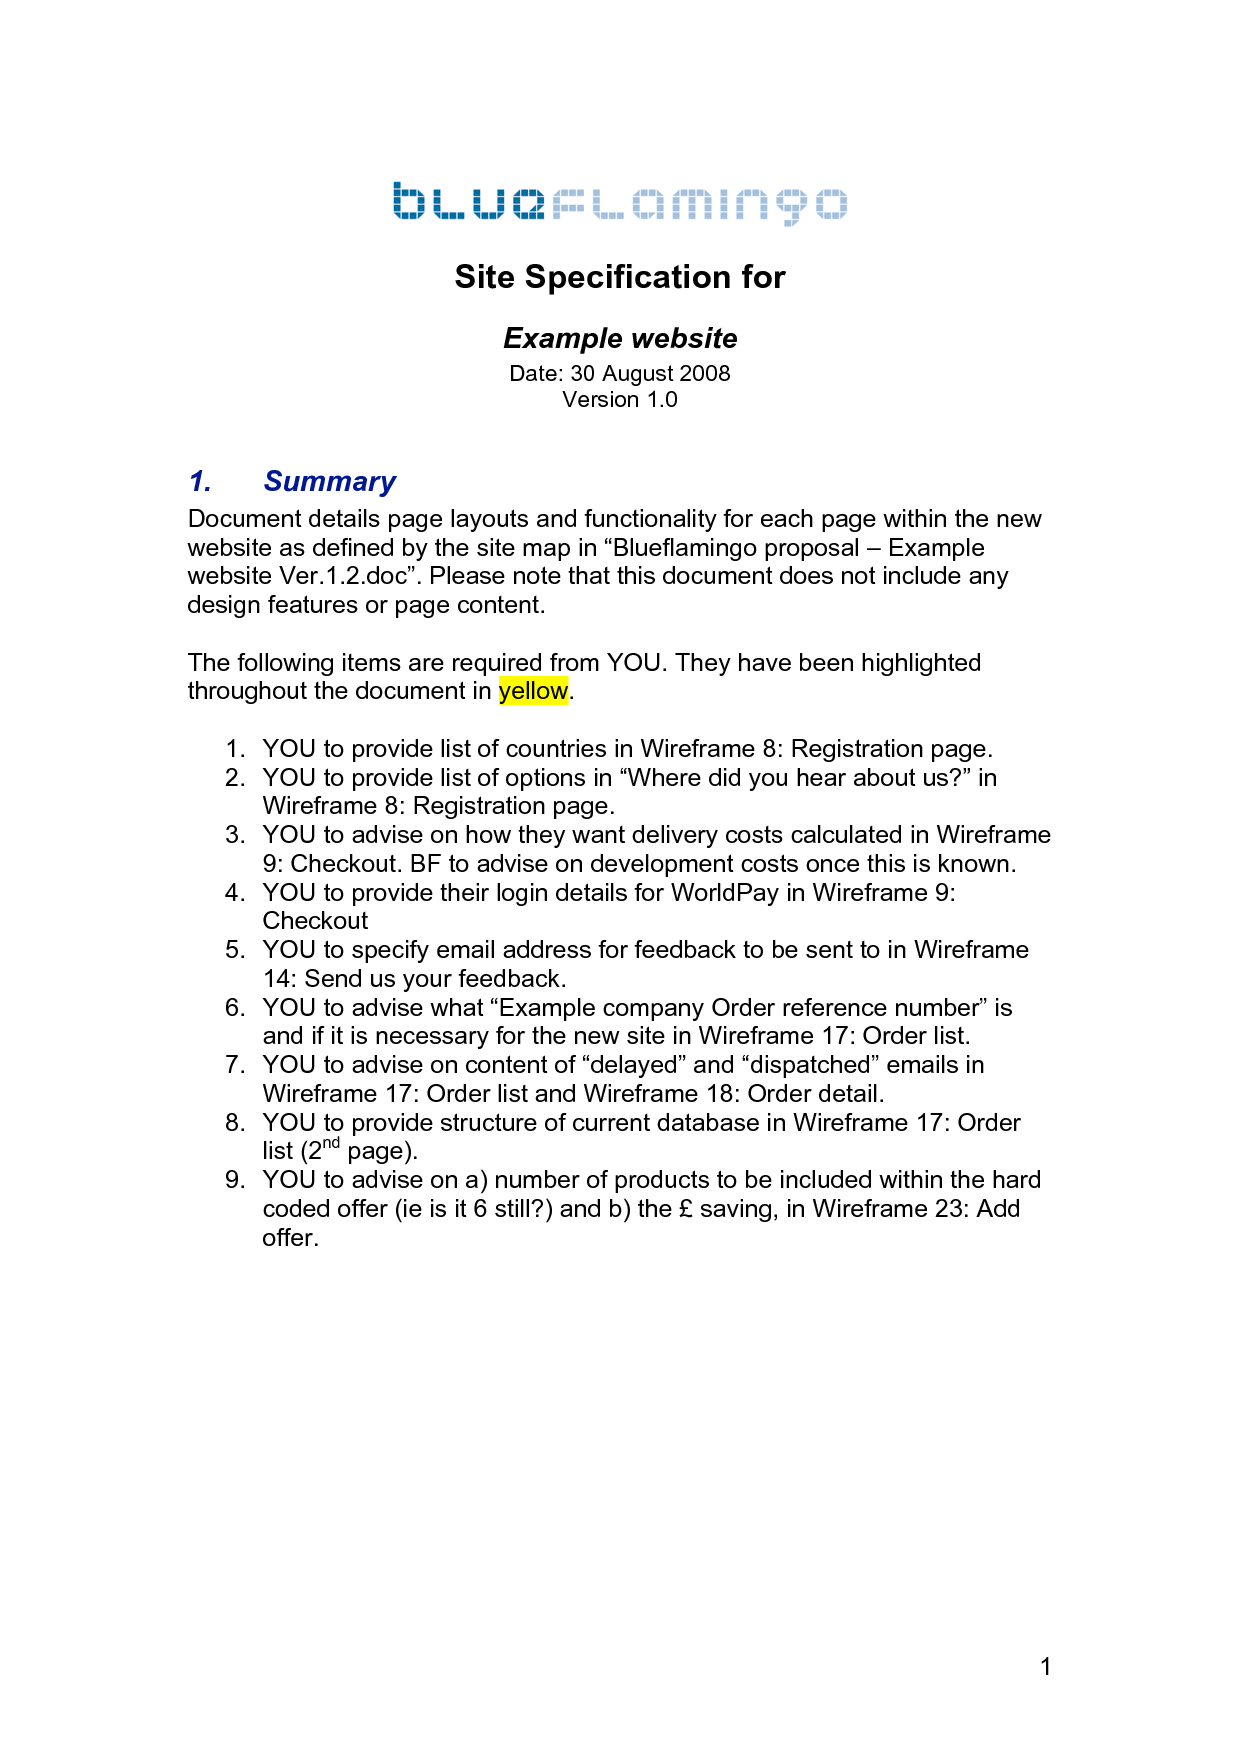 Website Specification Document Example Image